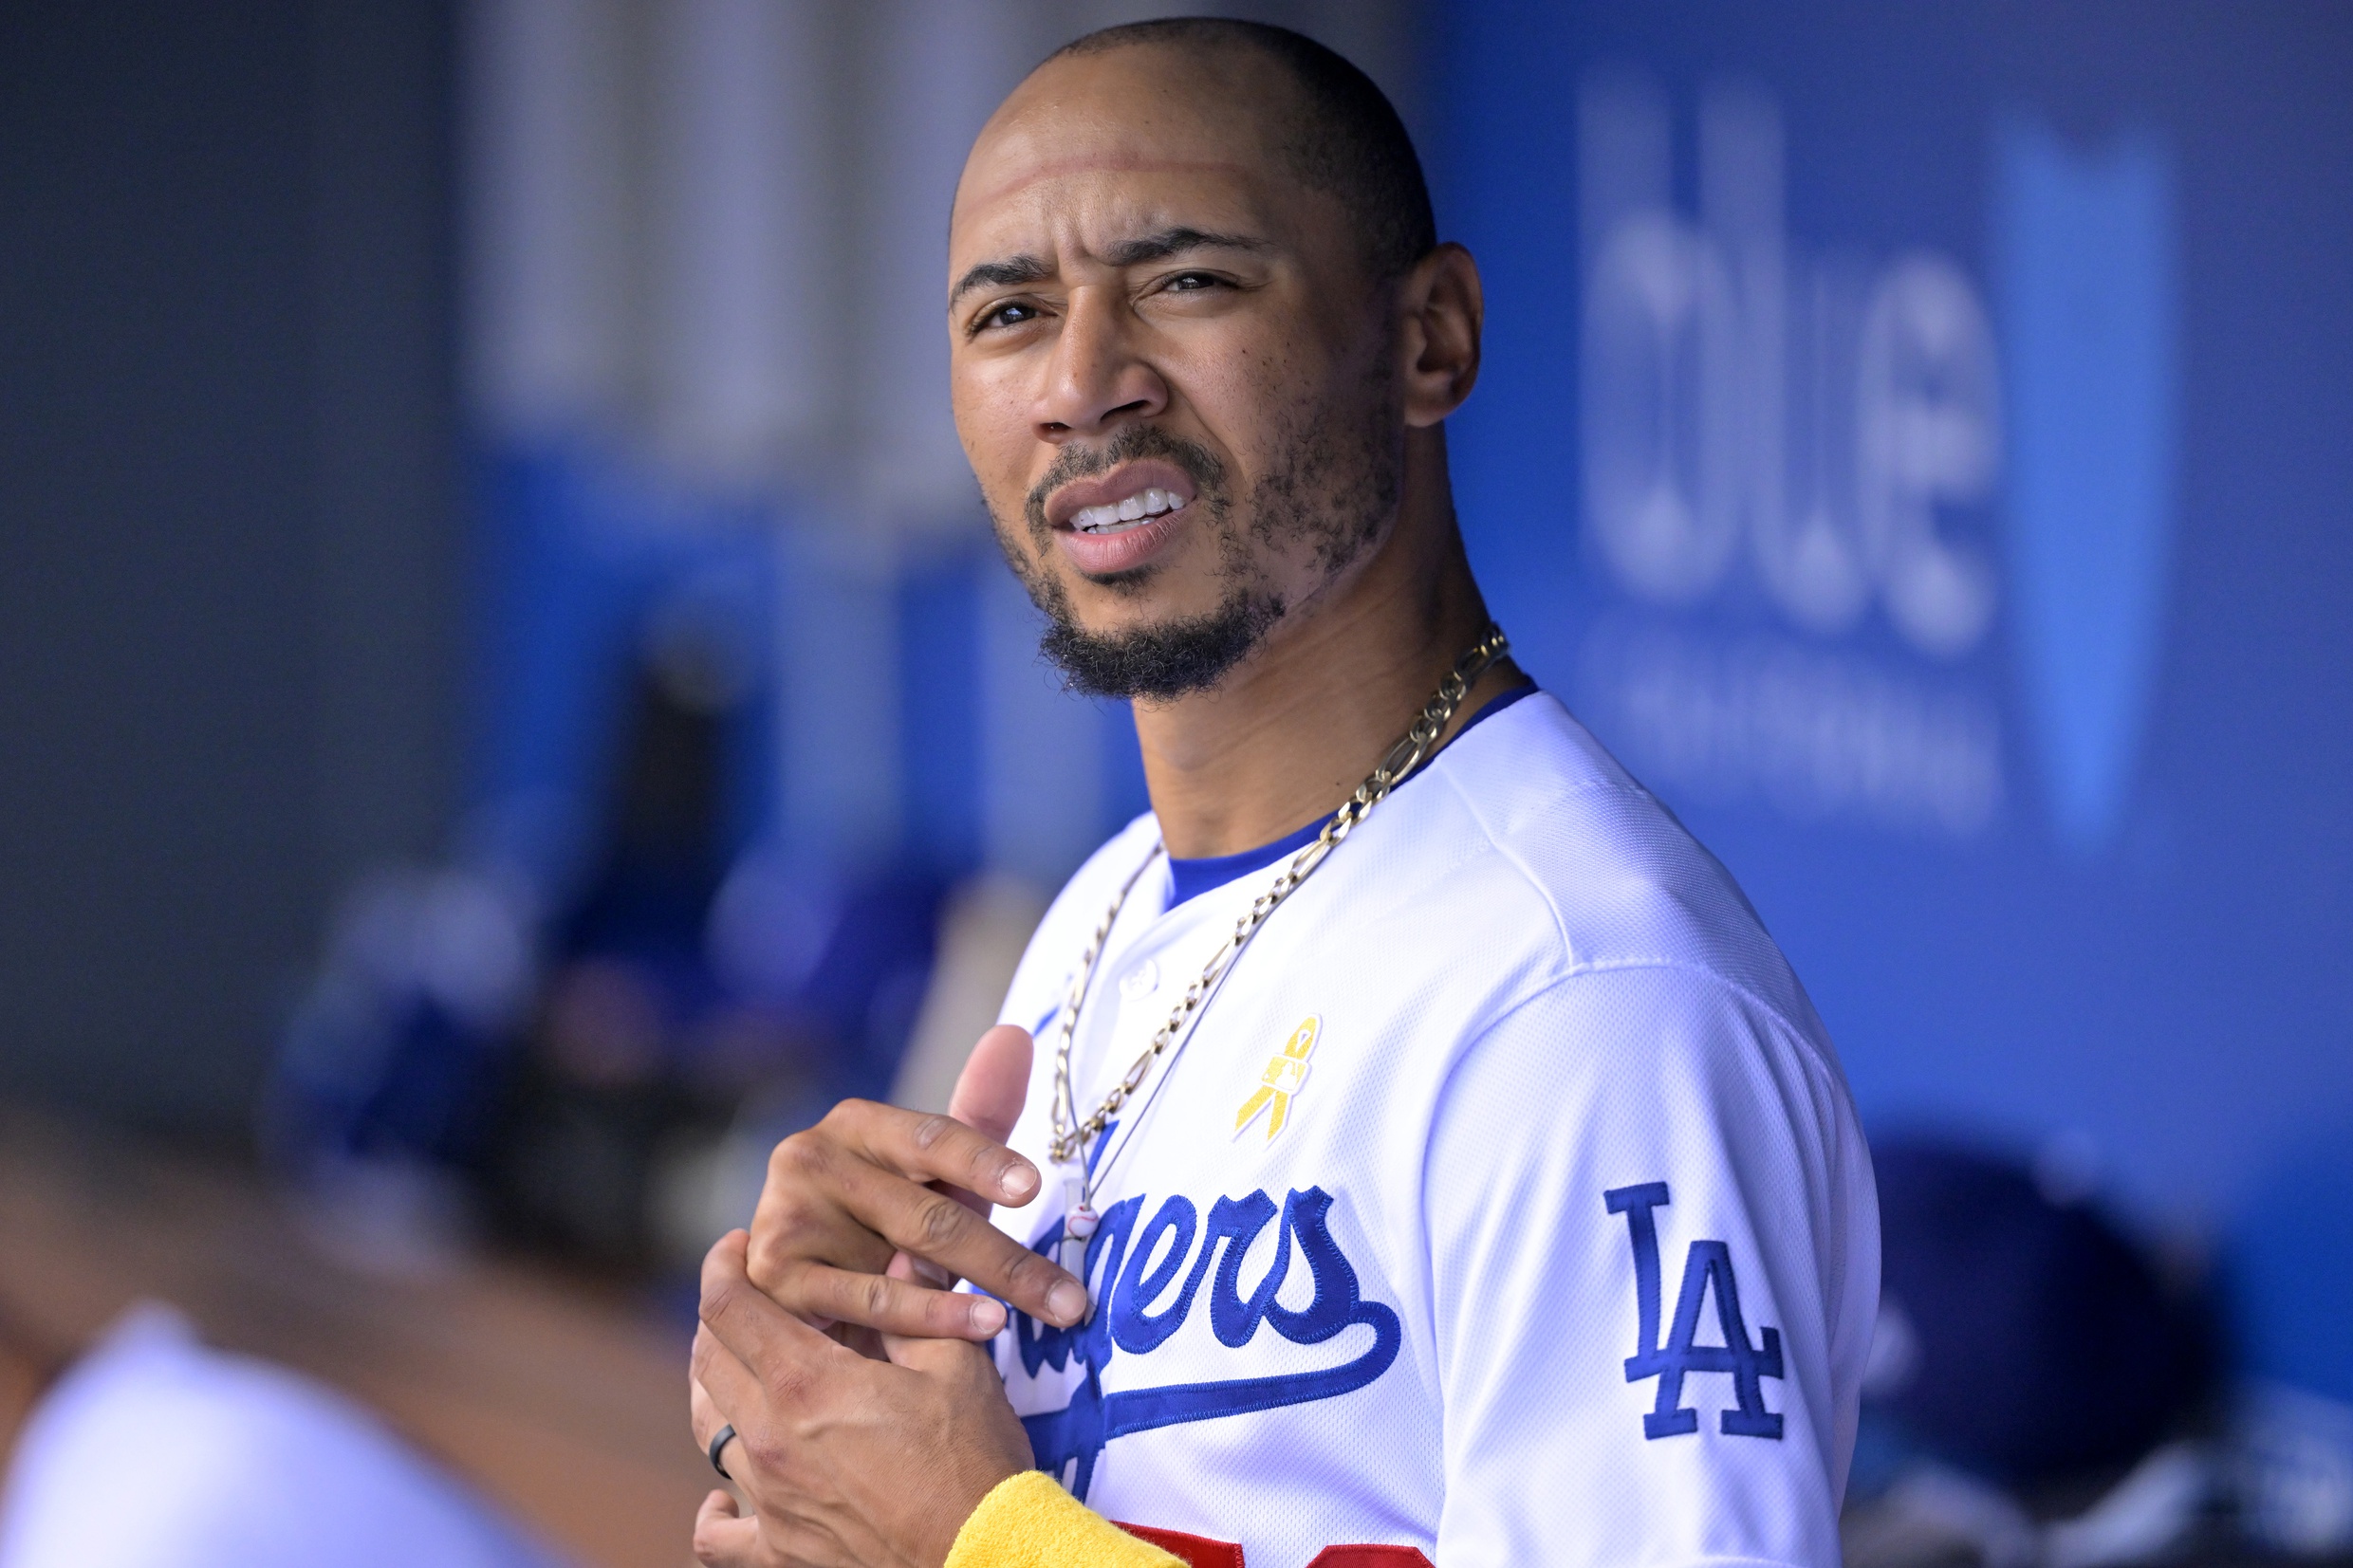 Juan Toribio on Twitter: The #Dodgers jersey will have a special